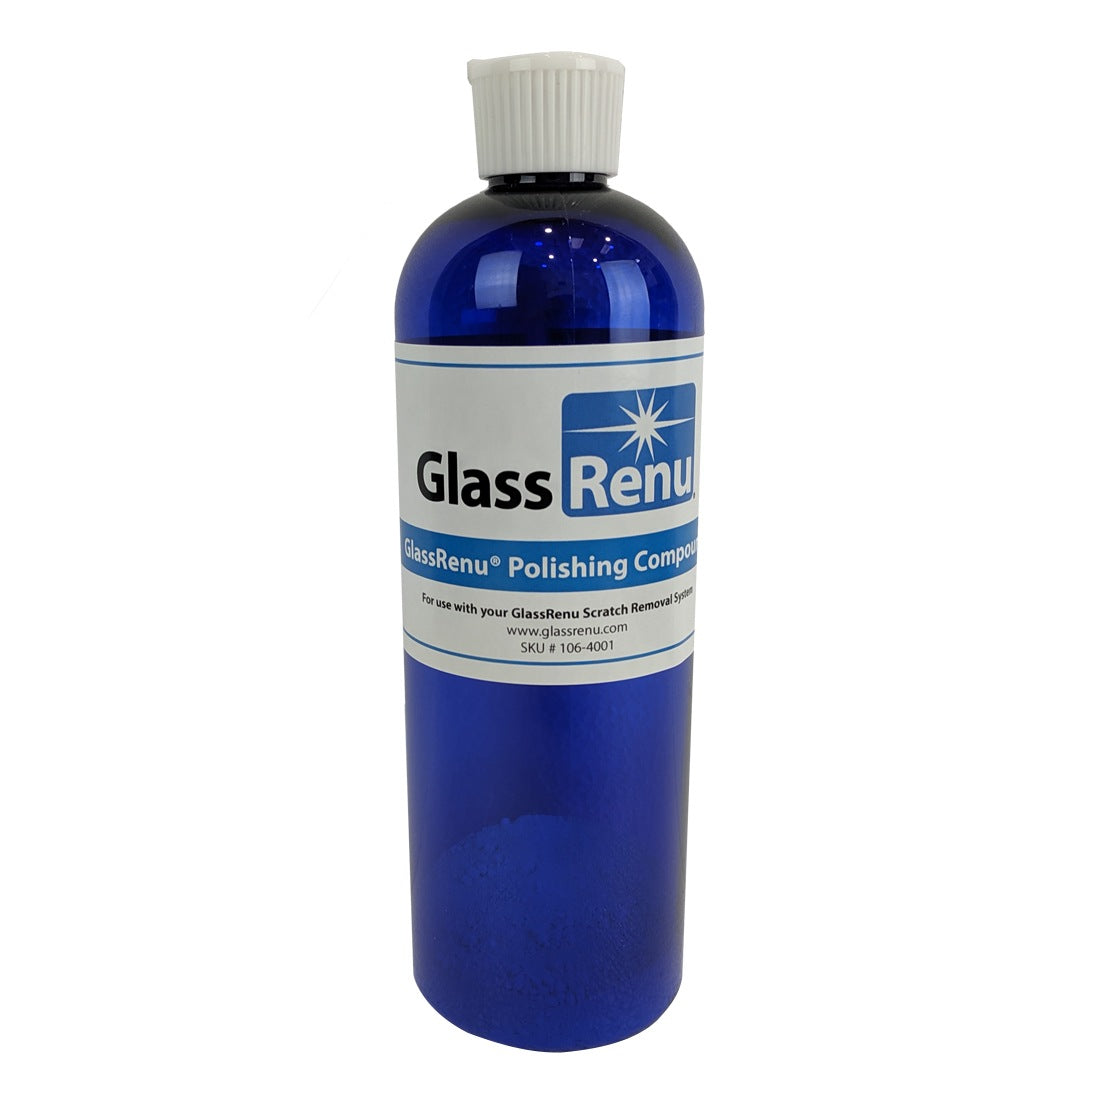 Glass polishing report on a product I purchased.